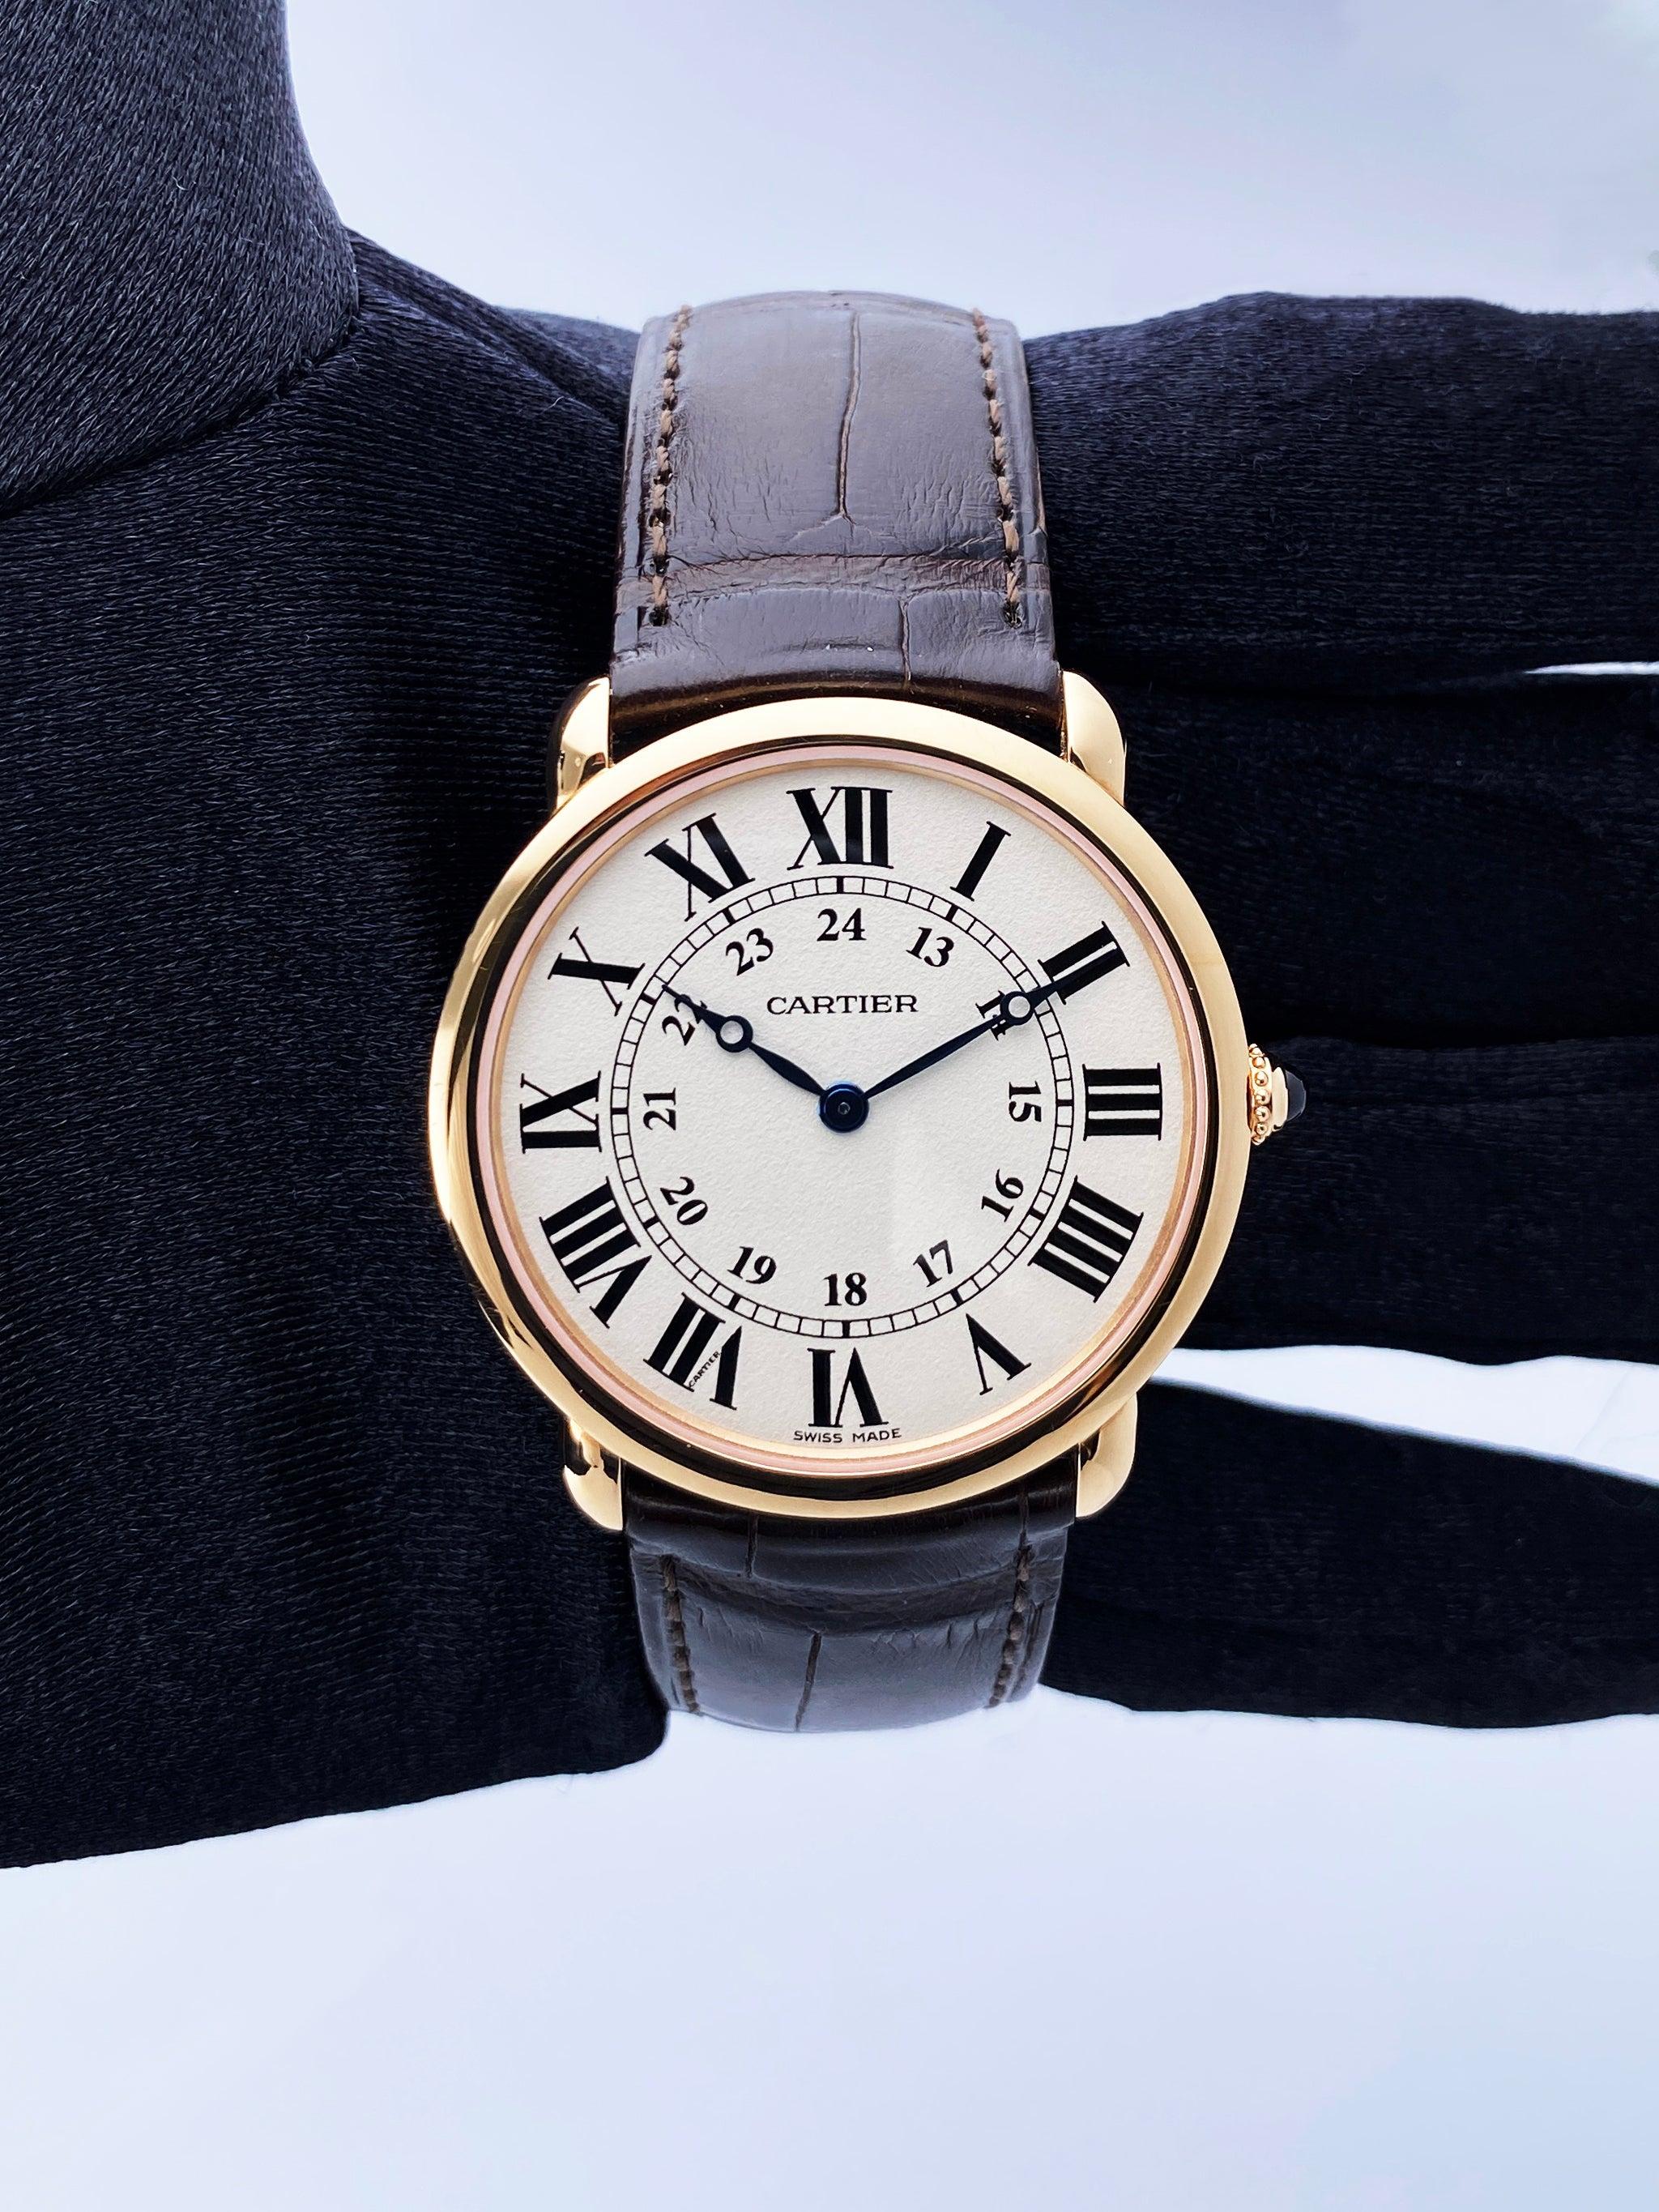 Cartier Ronde Louis W6800251 Watch. 36mm 18K rose gold case. 18K rose gold smoothed bezel. Silver-grained dial with blue hands and black Roman numeral hour markers. Minute markers on the inner dial. Brown alligator leather strap with 18K